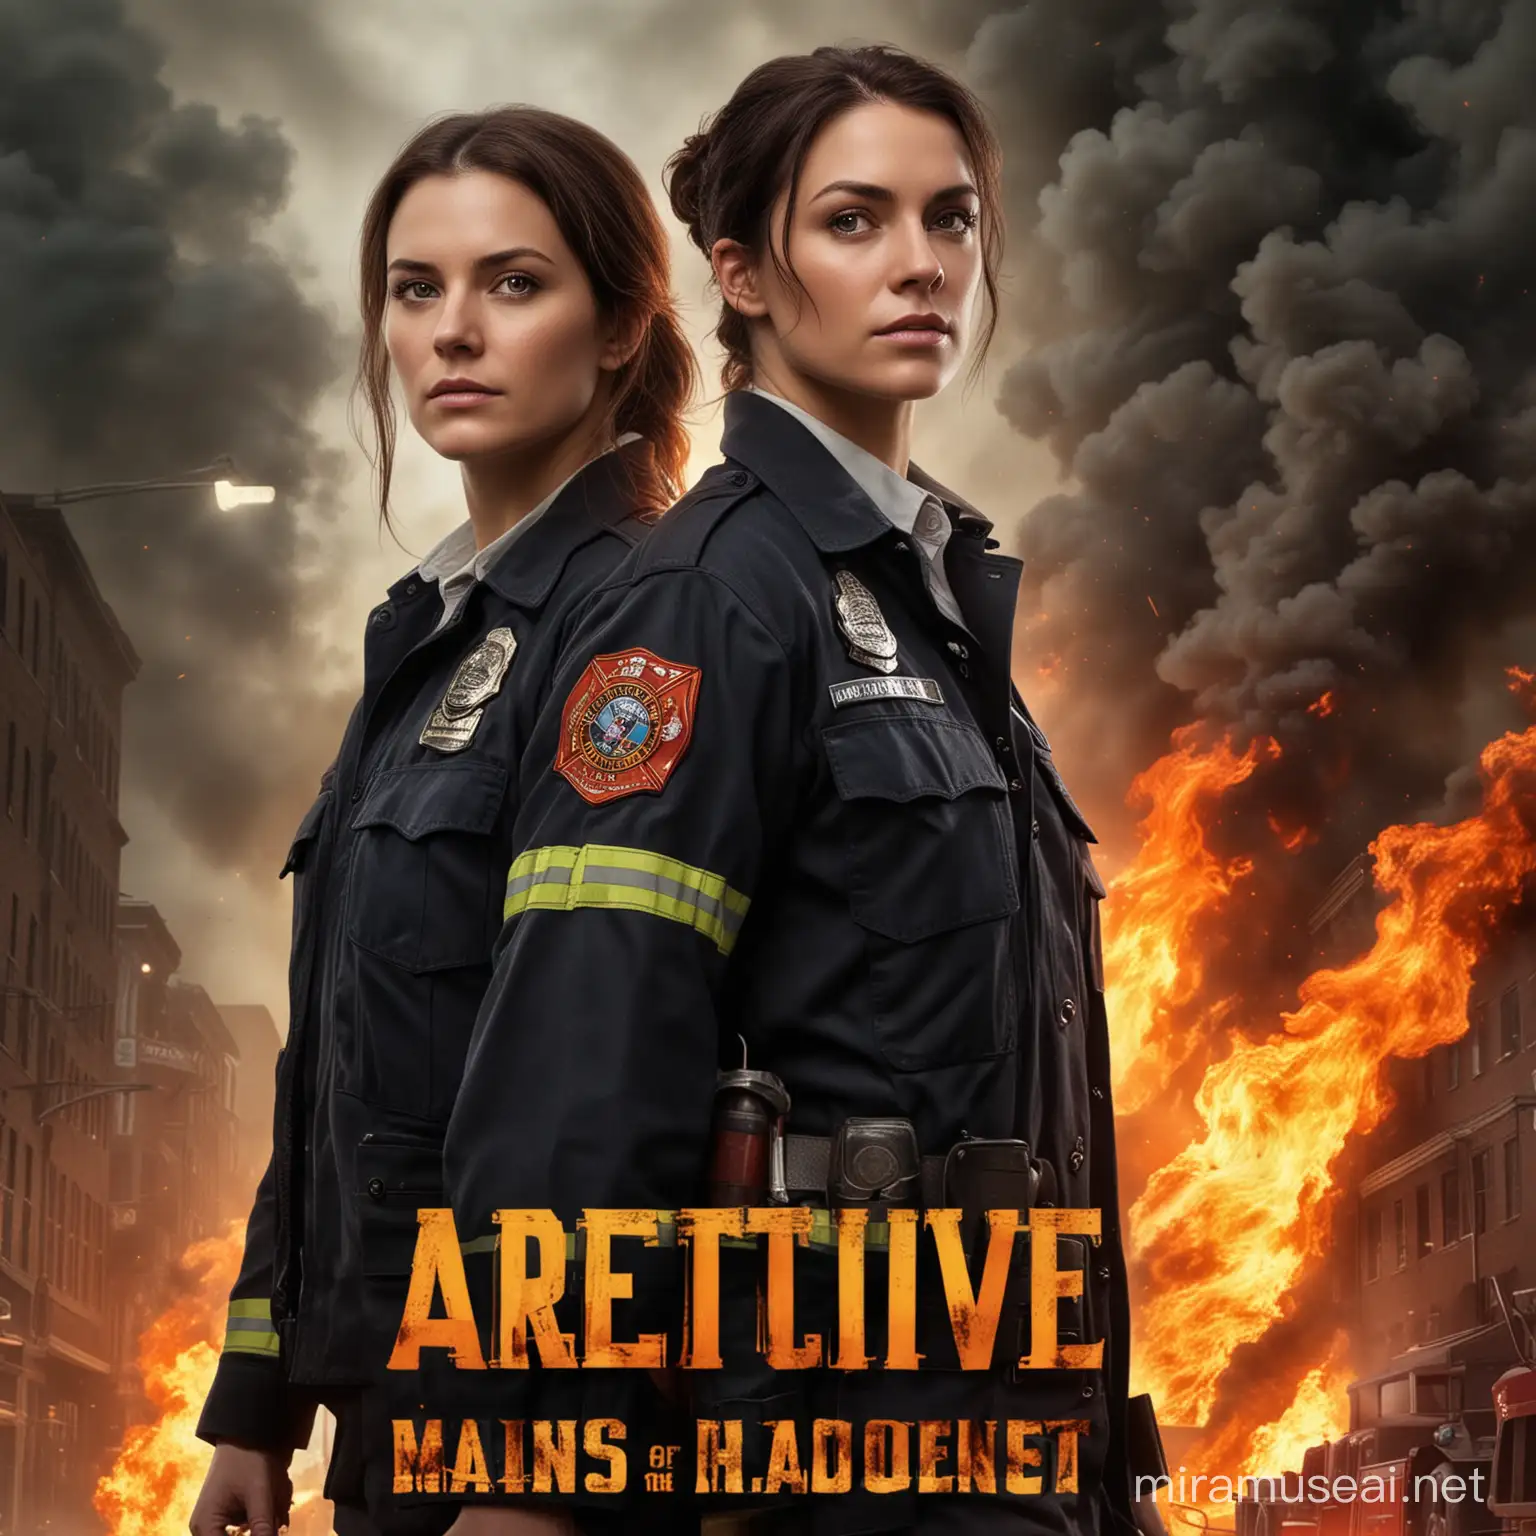 Book cover for a lesbian thriller.

Two FEMALE main characters:
Detective
Captain of the Fire Department

Synopsis of the story: Someone in the fire department is an arsonist, and the lead detective and fire captain of the fire department must work together to figure out who it is.
